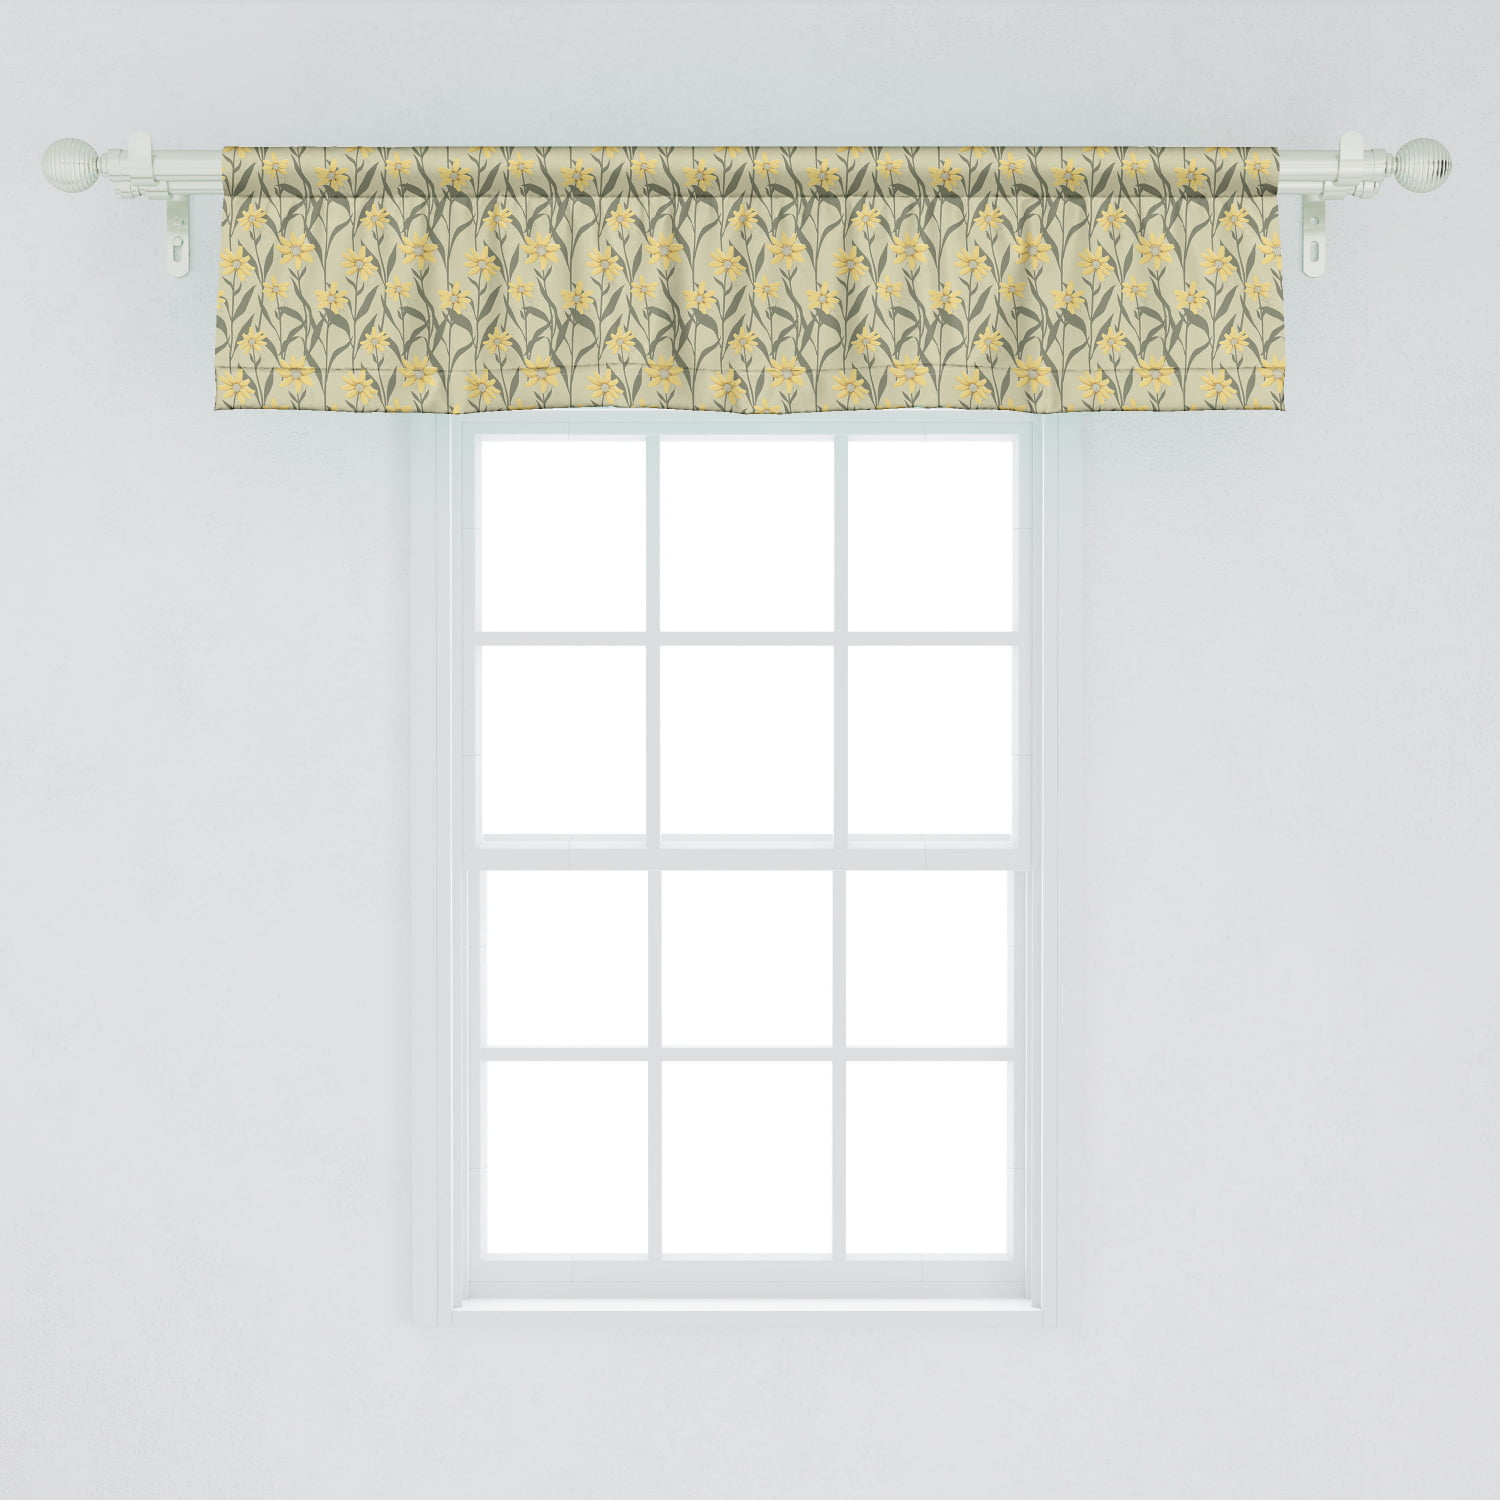 Ambesonne Yellow and Green Window Valance, Chamomile with Retro Design  Inspirations Botanical Arrangement, Curtain Valance for Kitchen Bedroom  Decor ...